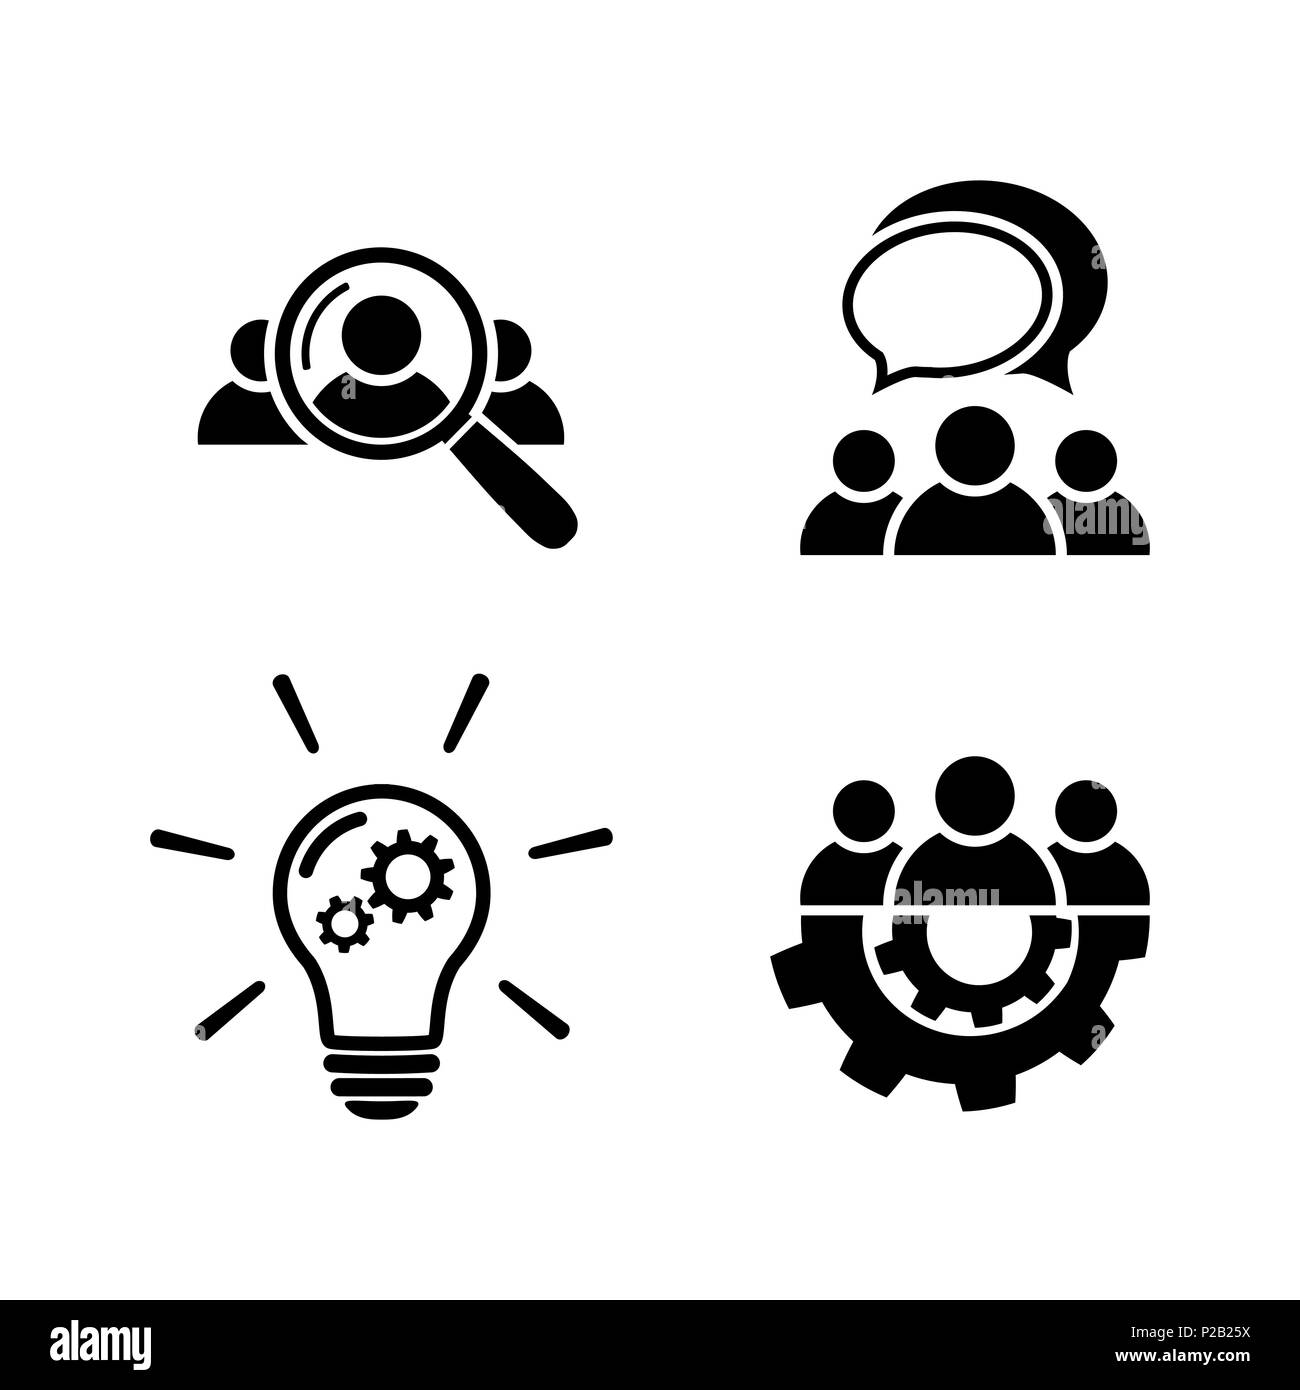 Teamwork icon set in flat style Stock Vector